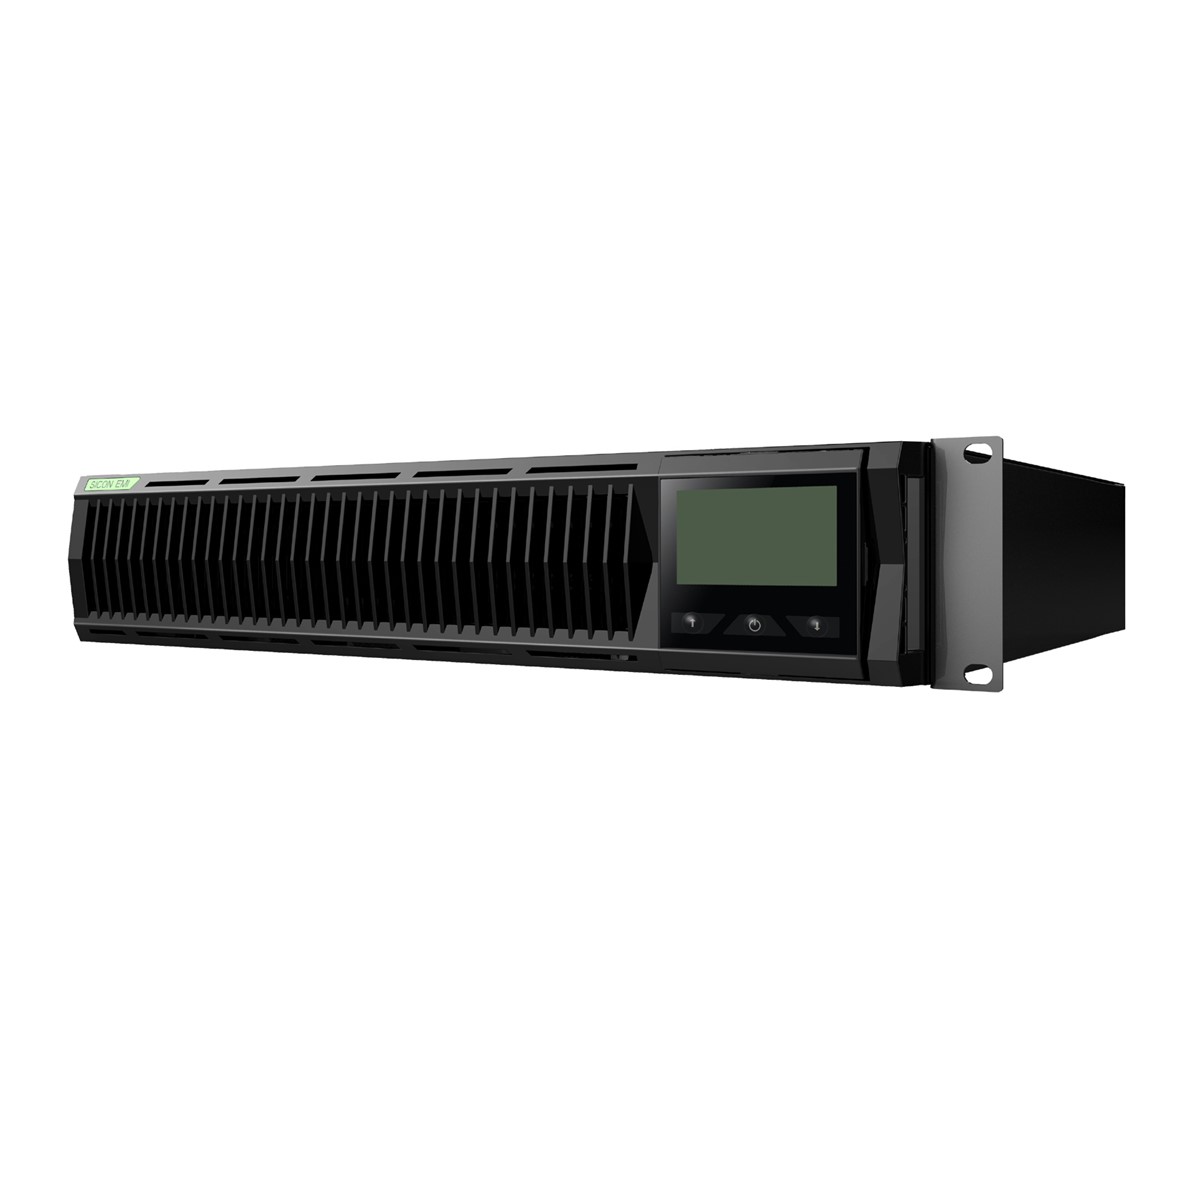 Digital Rackmount ups unit power supply with small data center